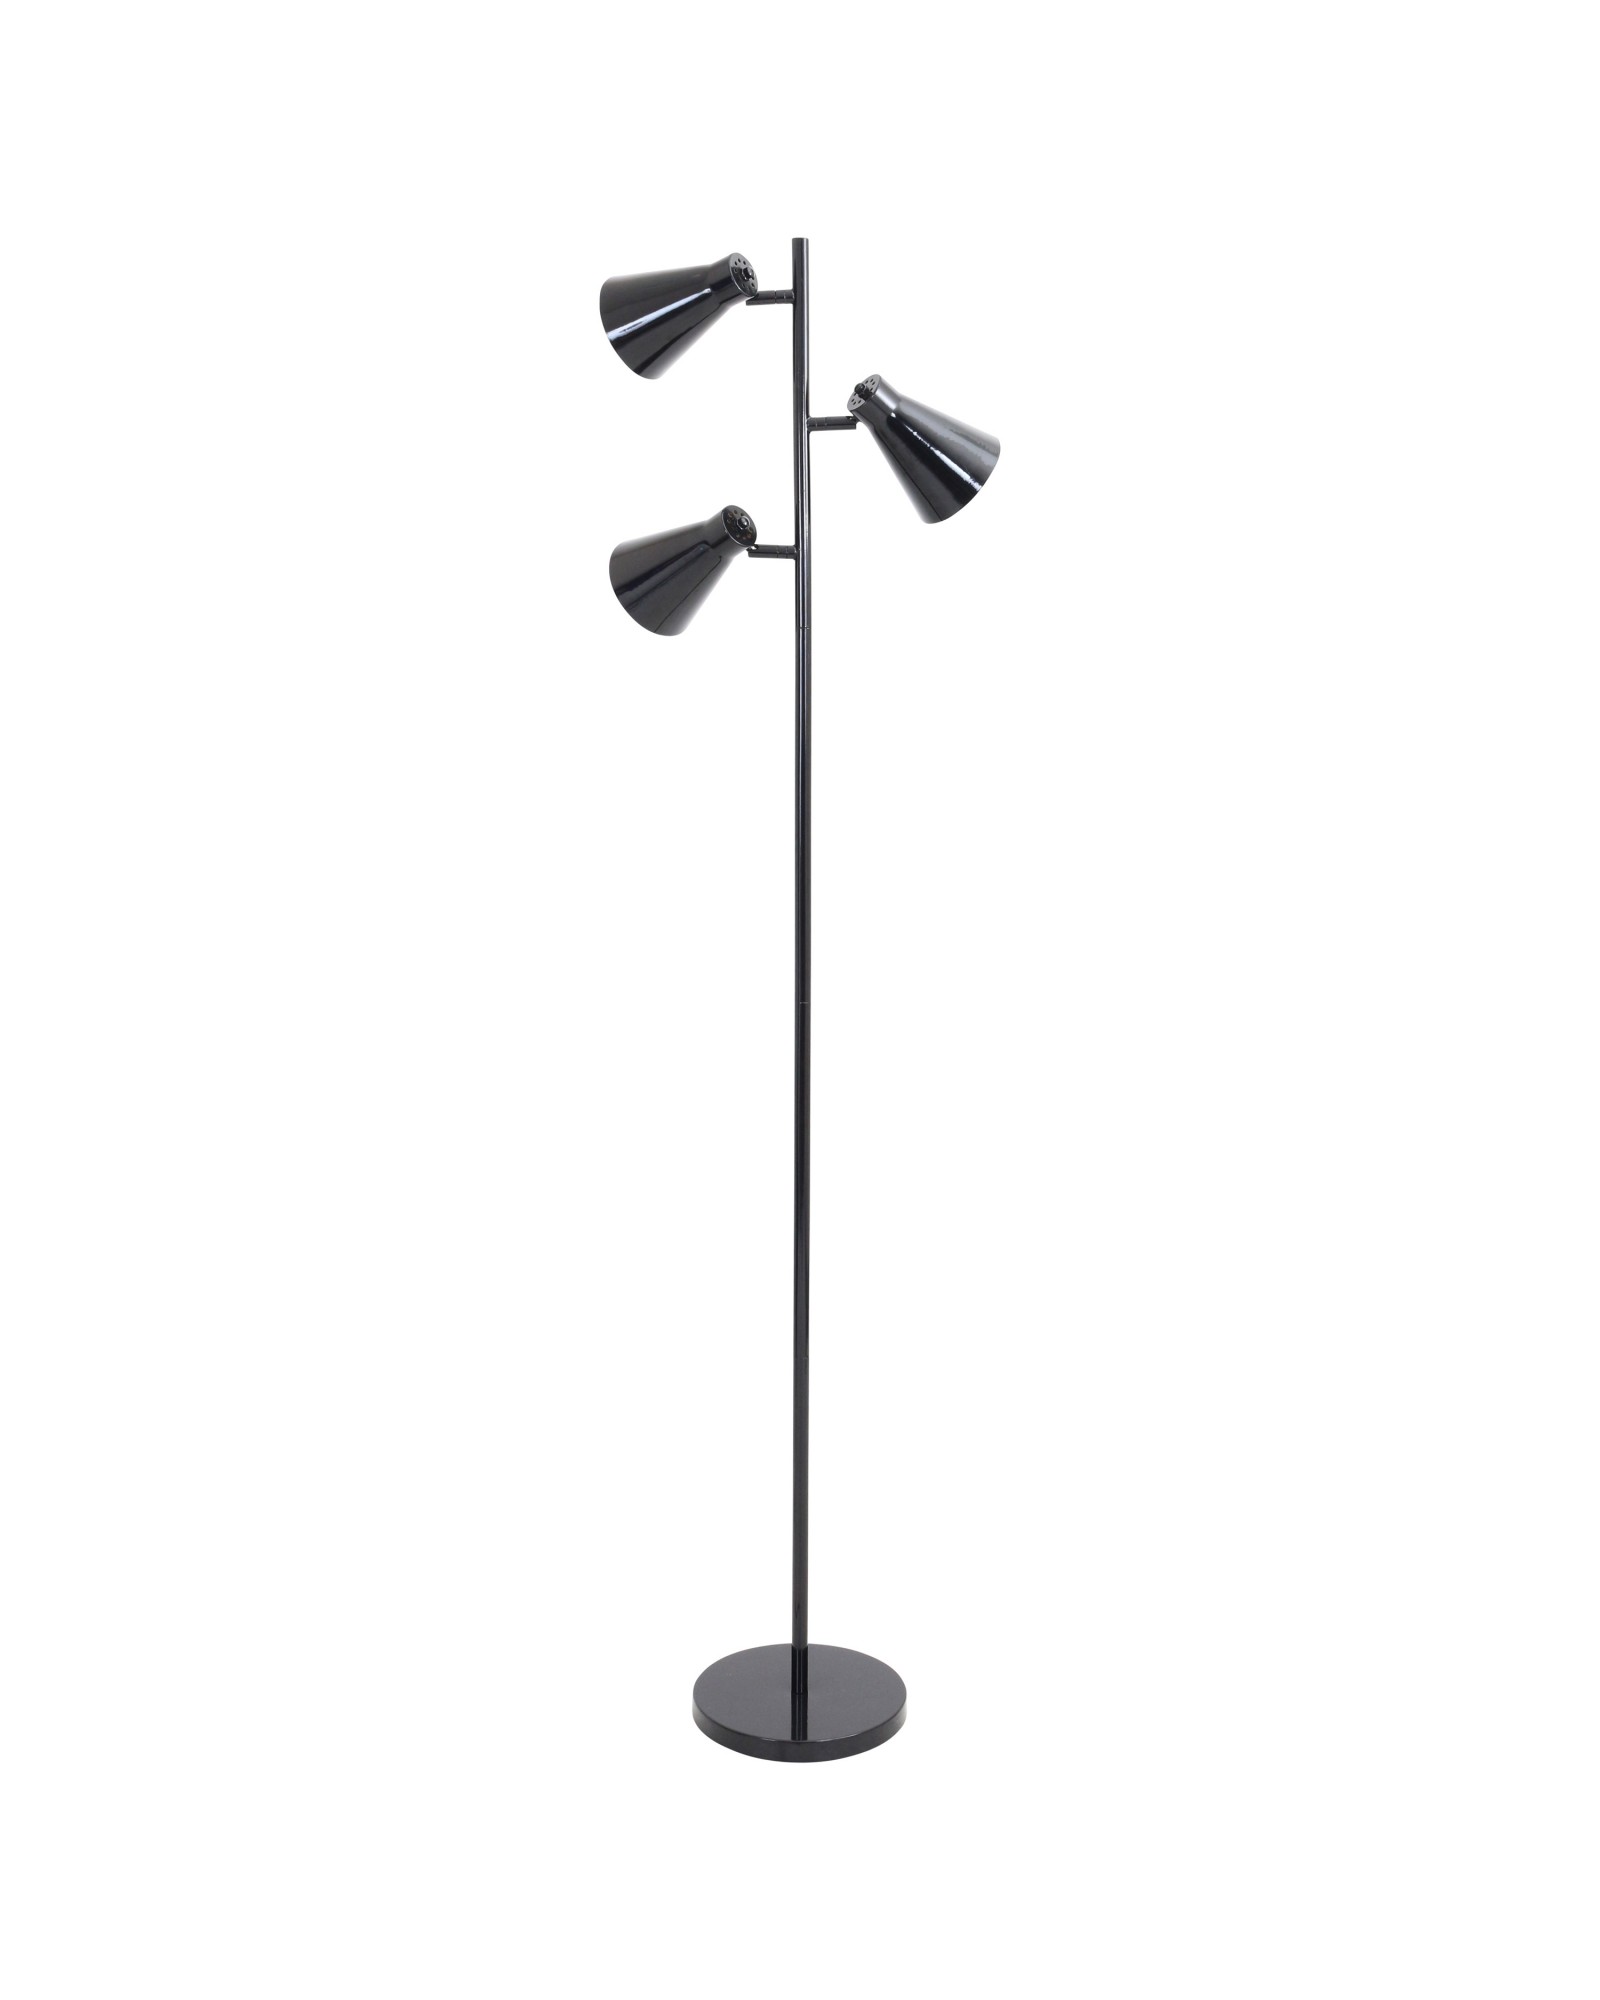 Tres Industrial Floor Lamp in Black and Gold